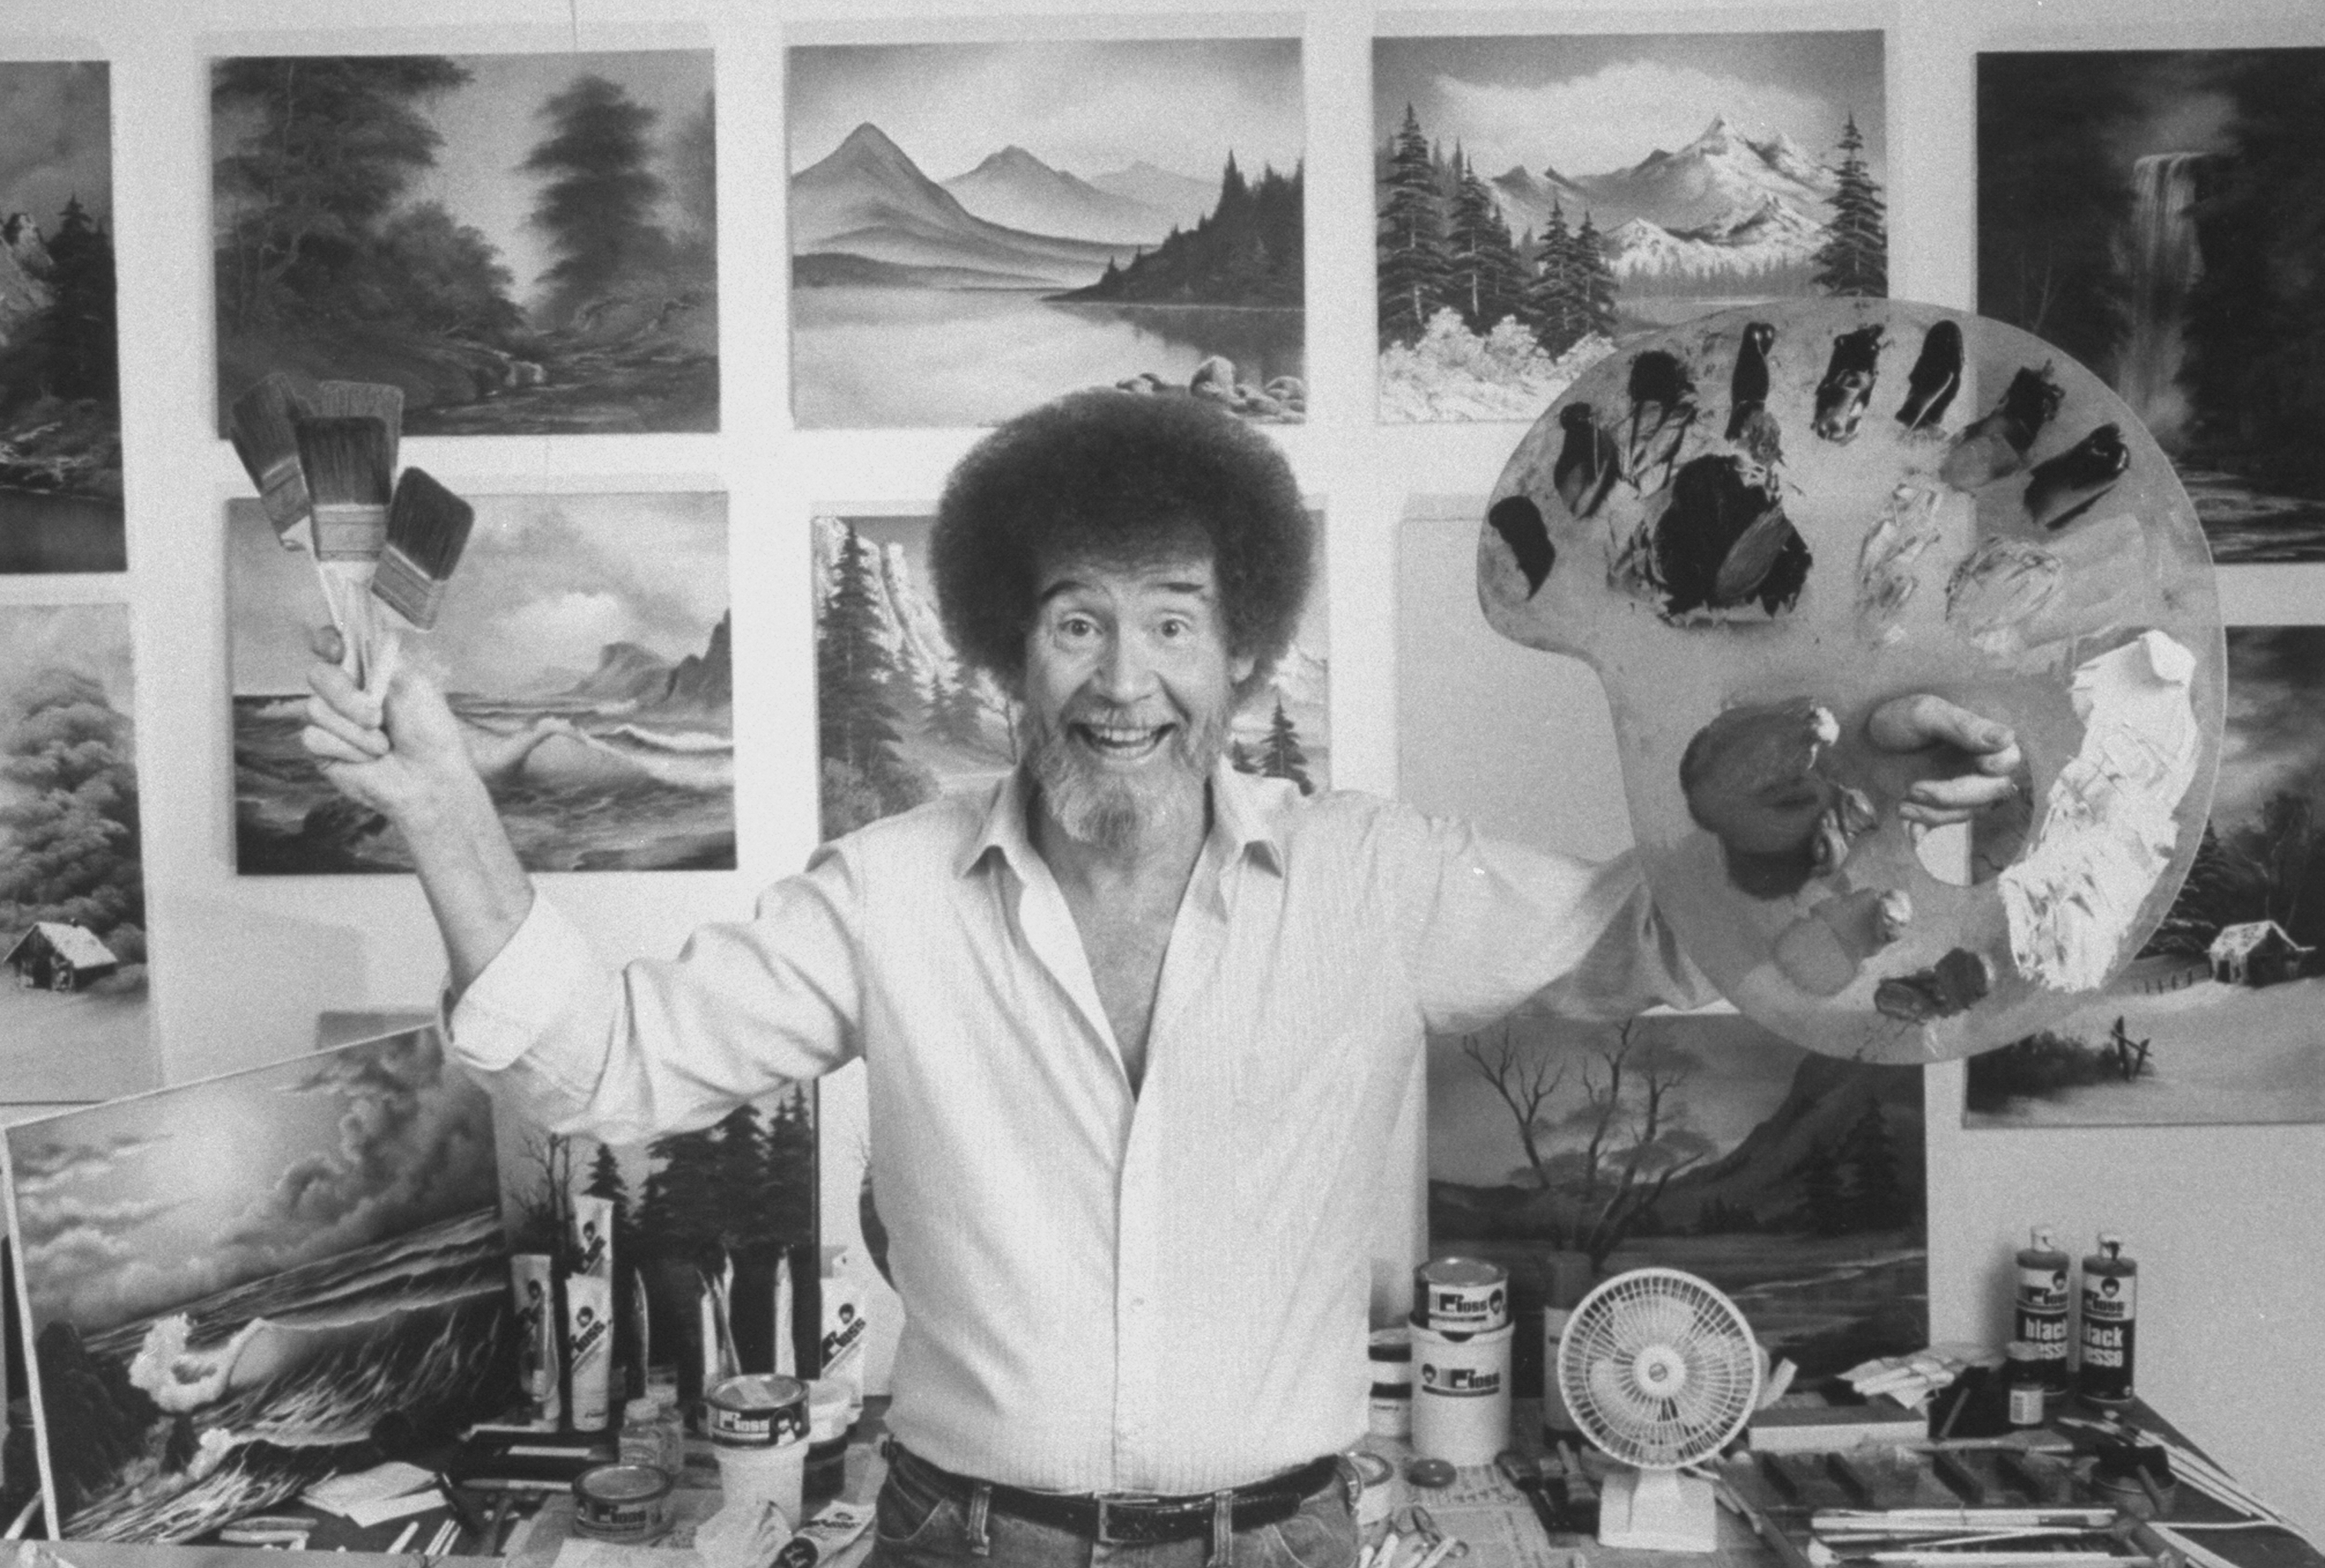 Photo of Bob Ross excitedly showing off his tools before painting on July 16, 1991 | Source: Getty Images